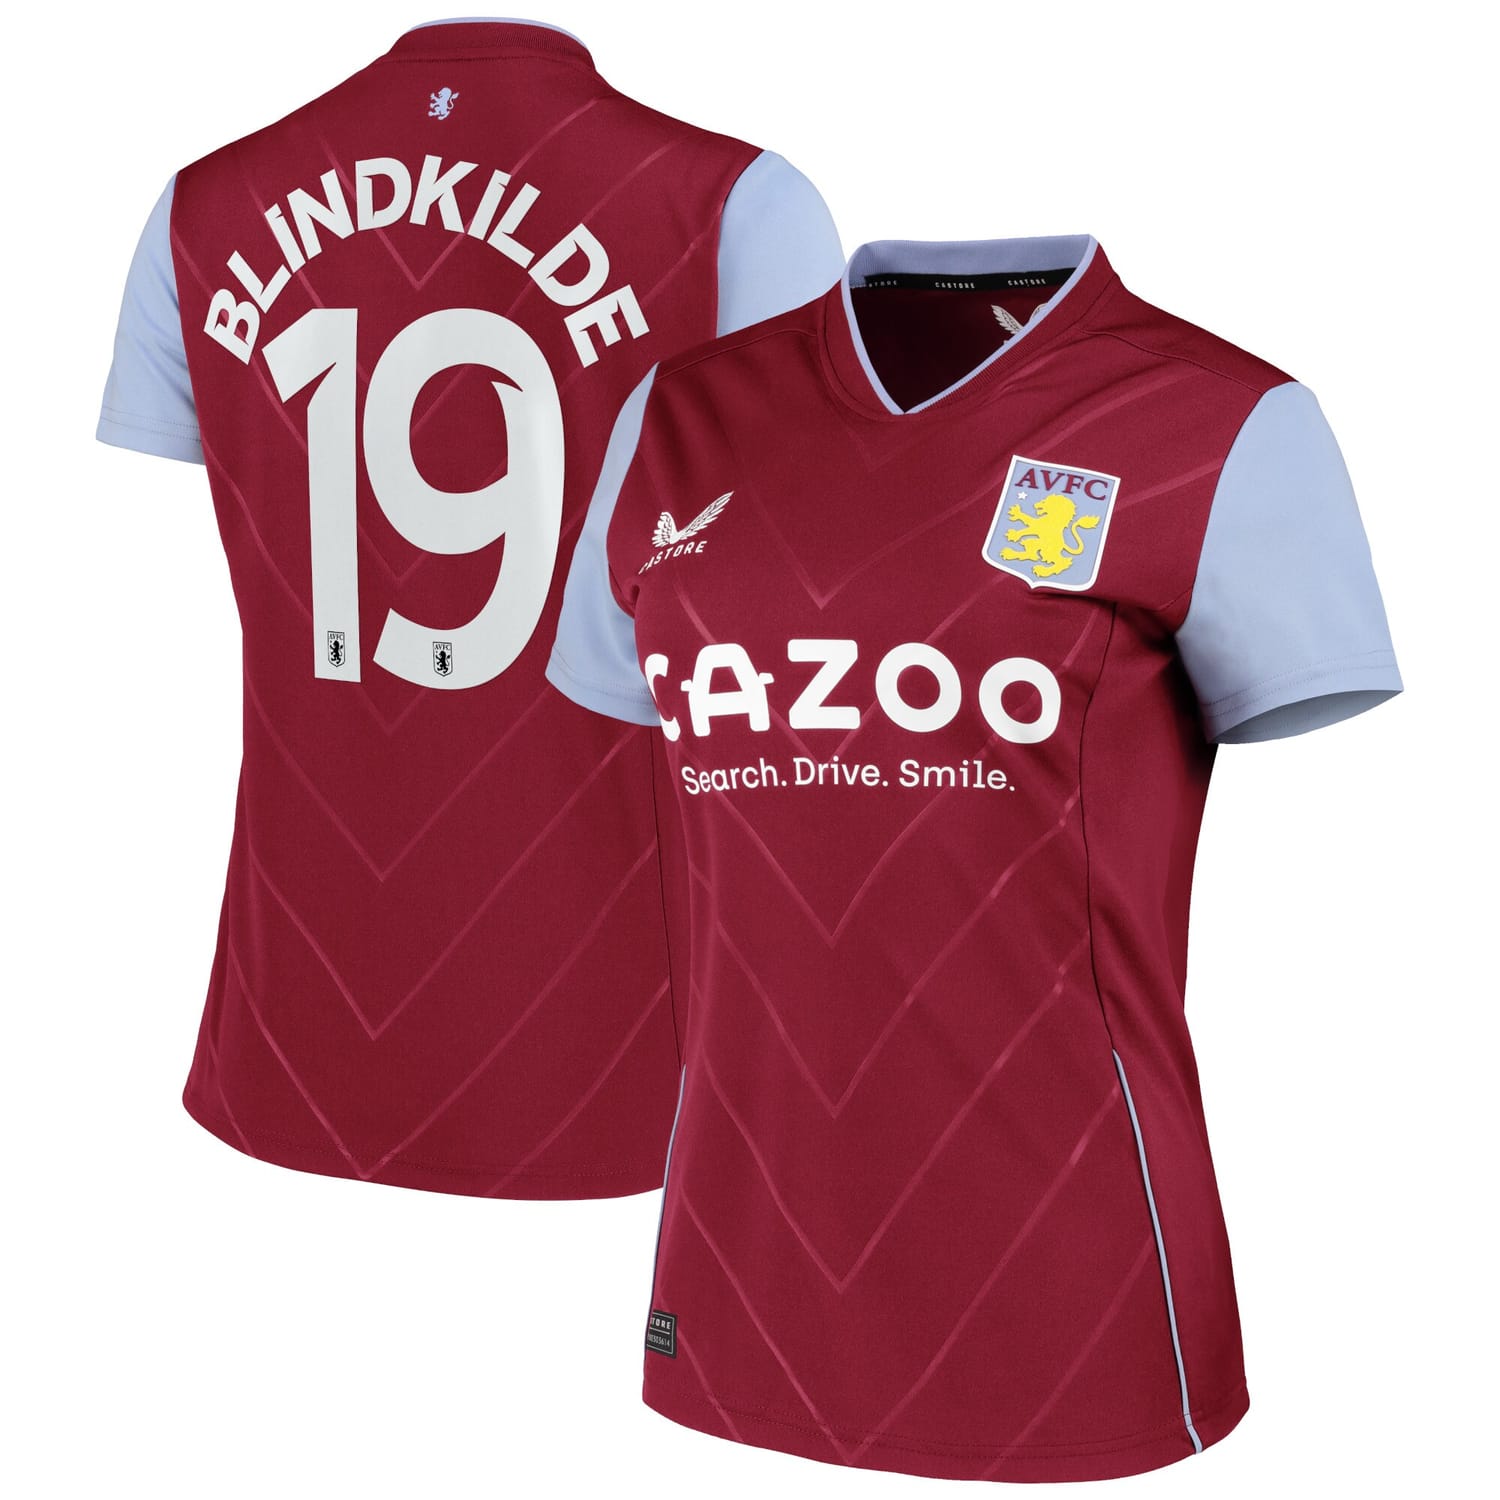 Premier League Aston Villa Home Cup Jersey Shirt 2022-23 player Laura Blindkilde 19 printing for Women